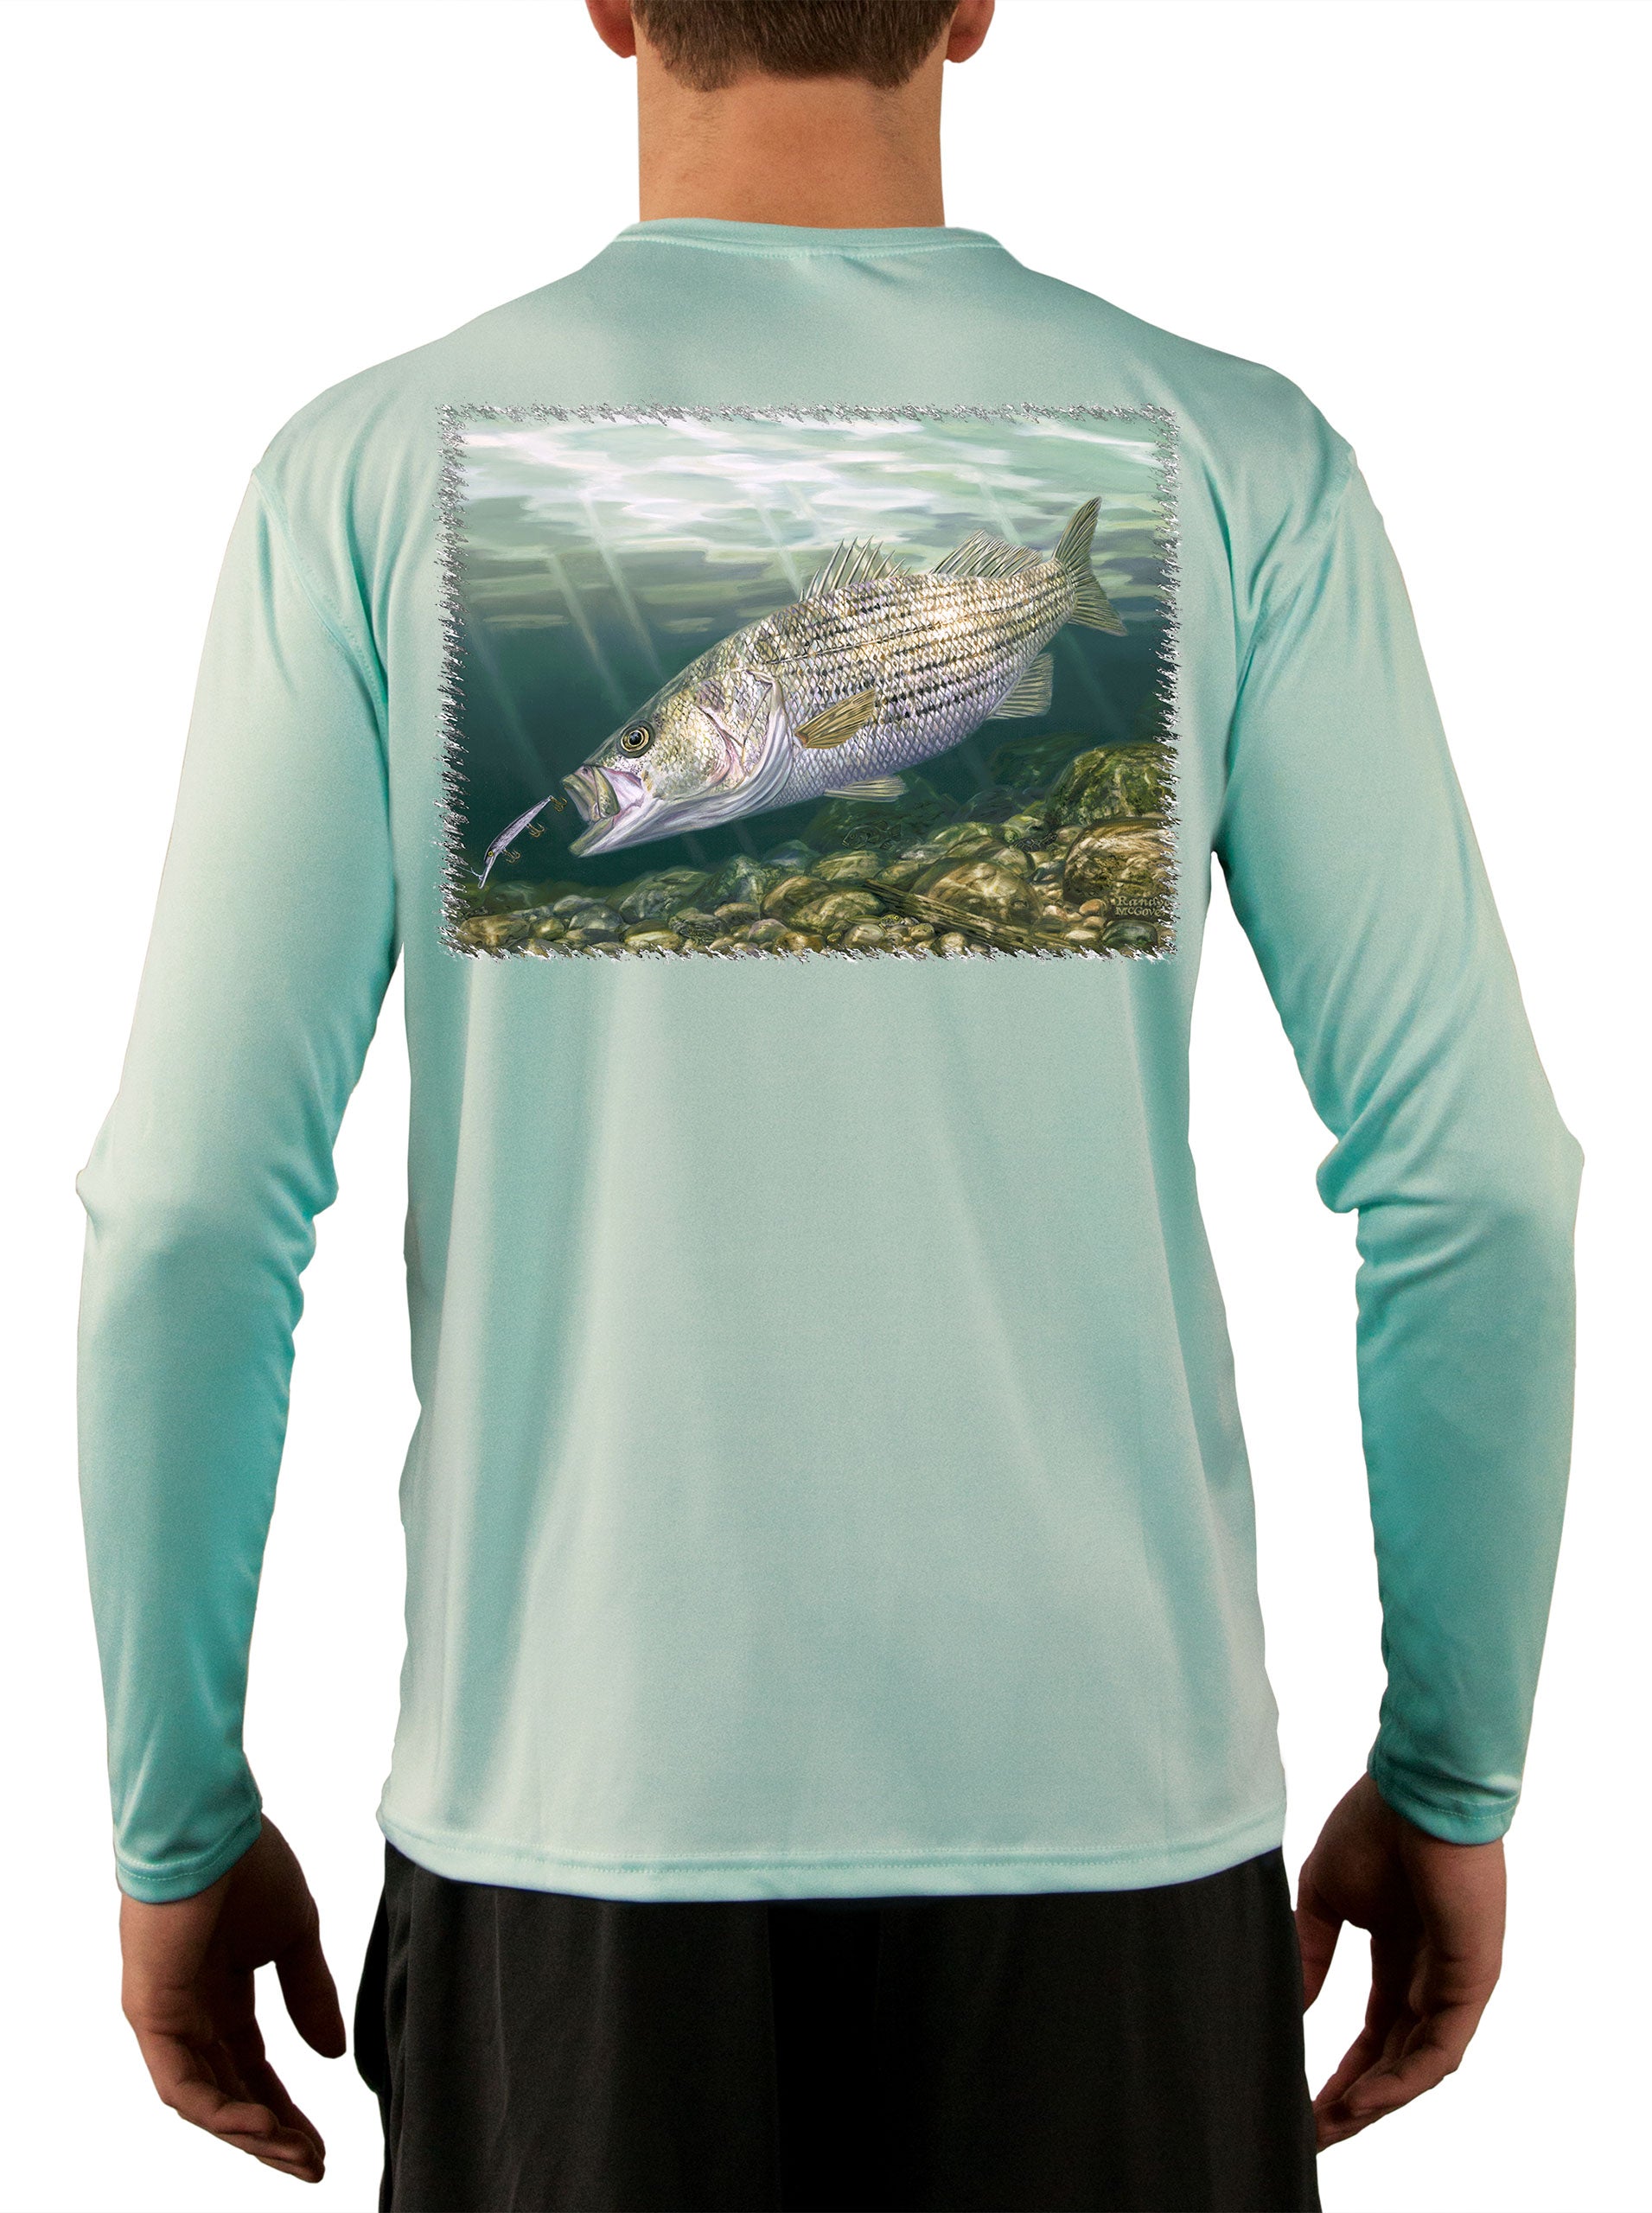 New] Striper Fishing Shirts for Men with Striped Bass Fish Artwork